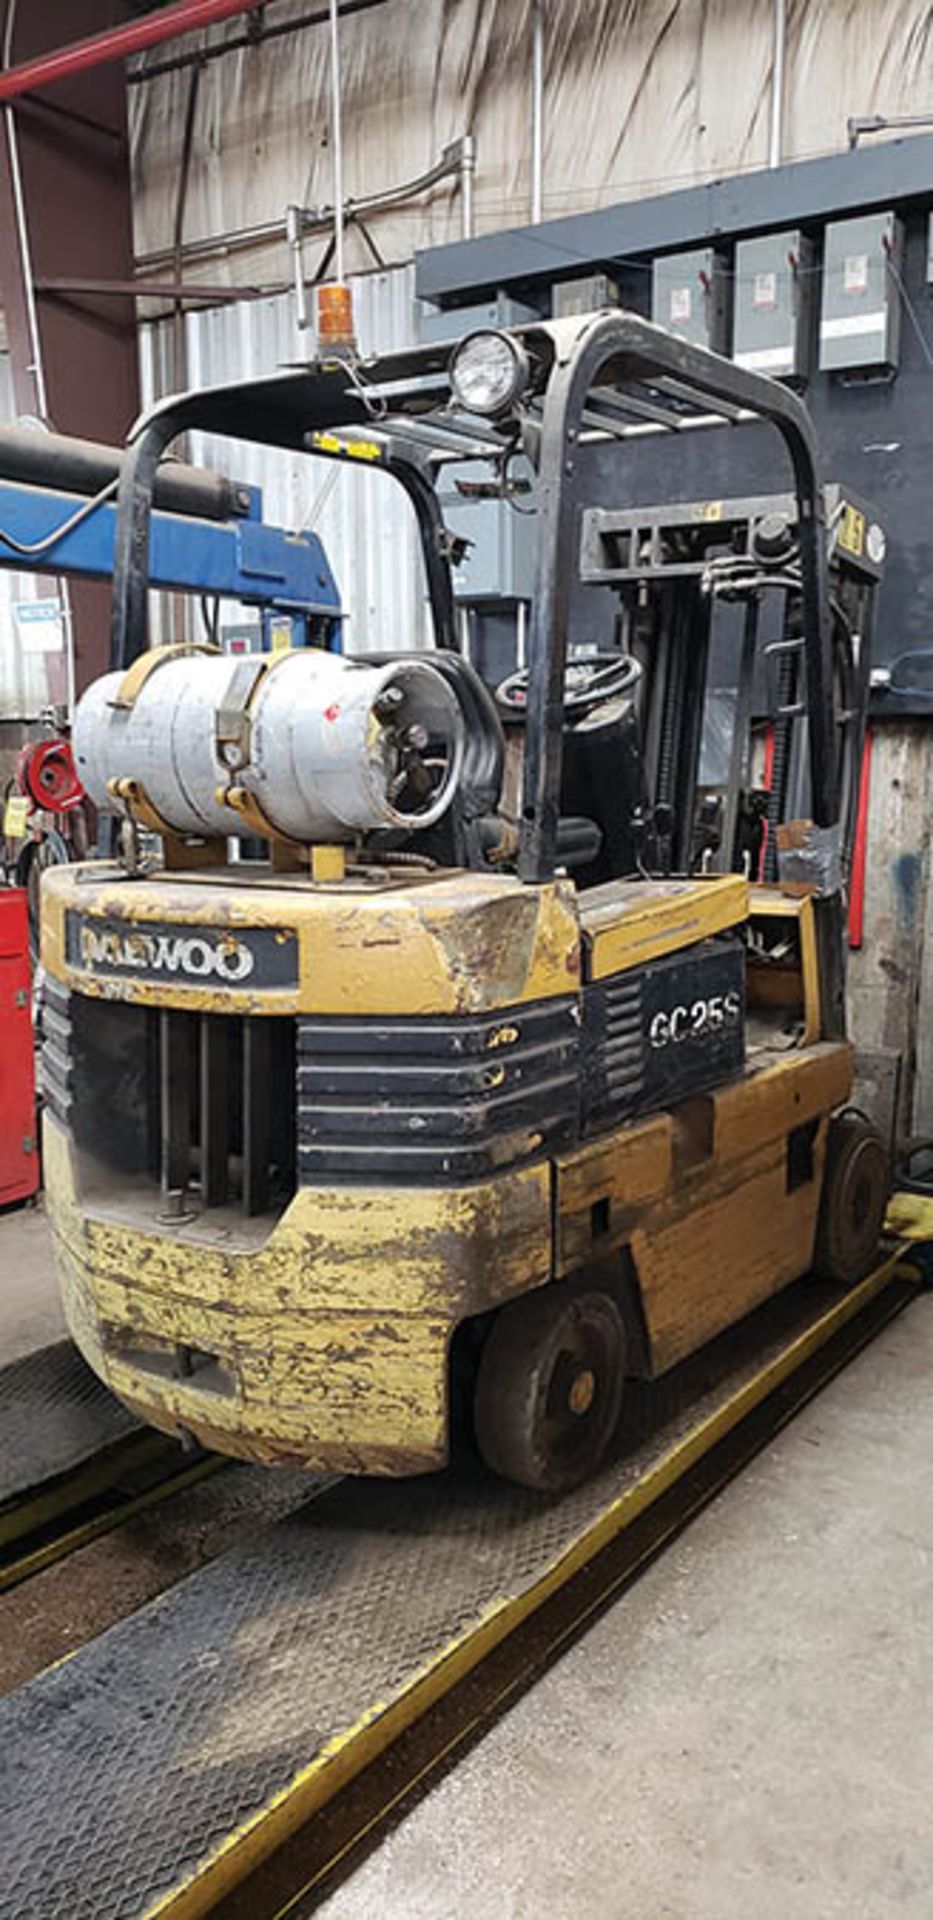 DAEWOO 5,000 LB. CAP. LPG FORKLIFT, MODEL GC255-2, 3-STAGE MAST, 241'' MAX. LOAD HEIGHT, S/N 06- - Image 3 of 6